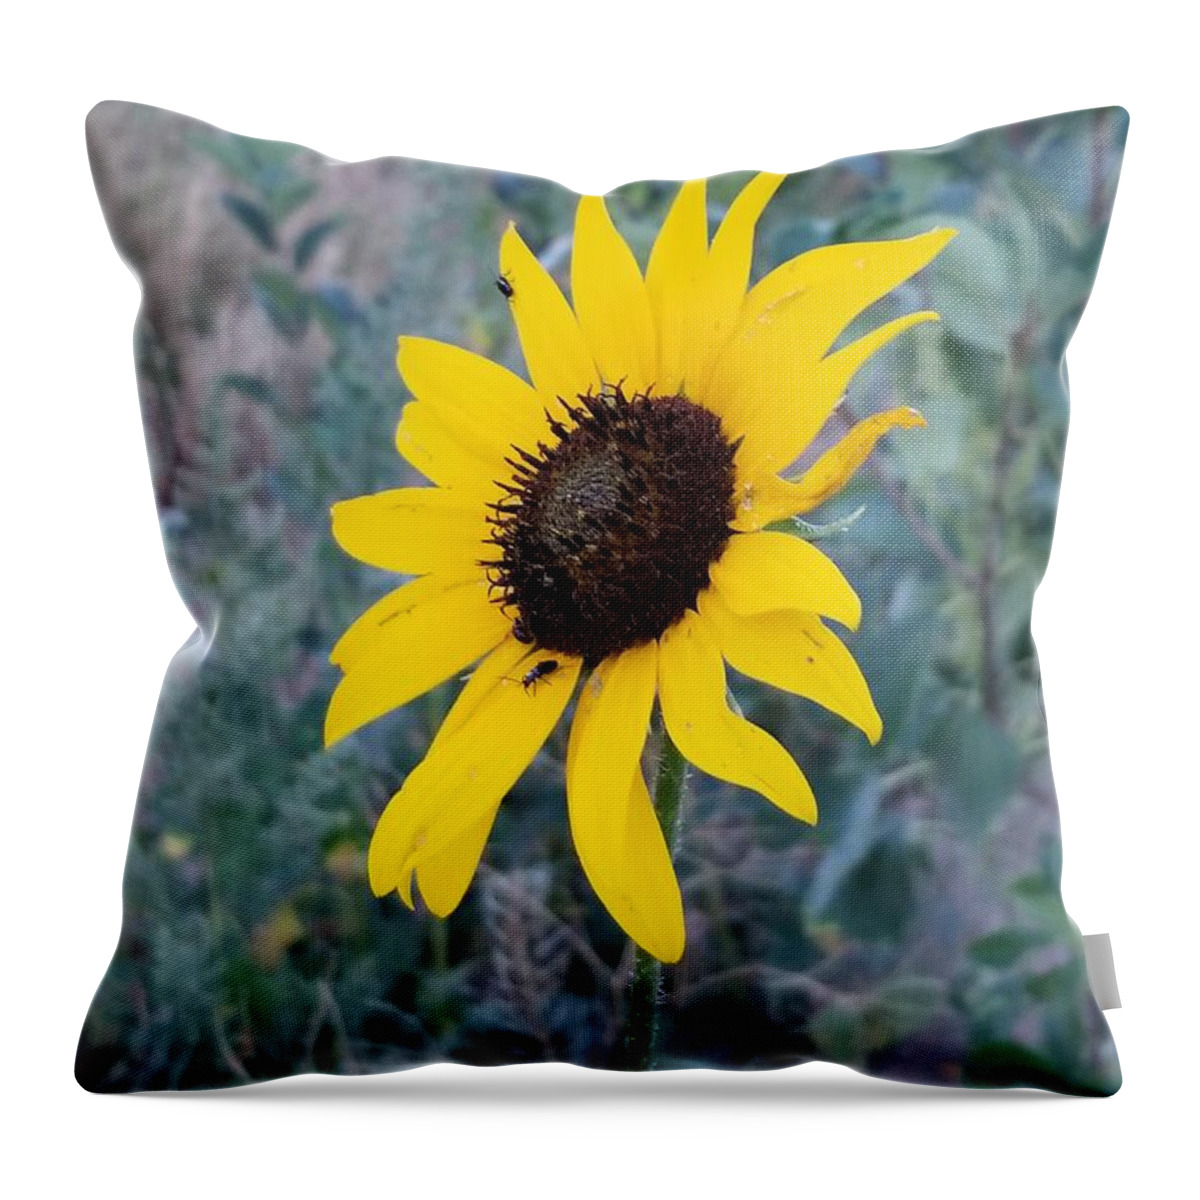 Beautiful Throw Pillow featuring the photograph Mountain Daisy by Rob Hans